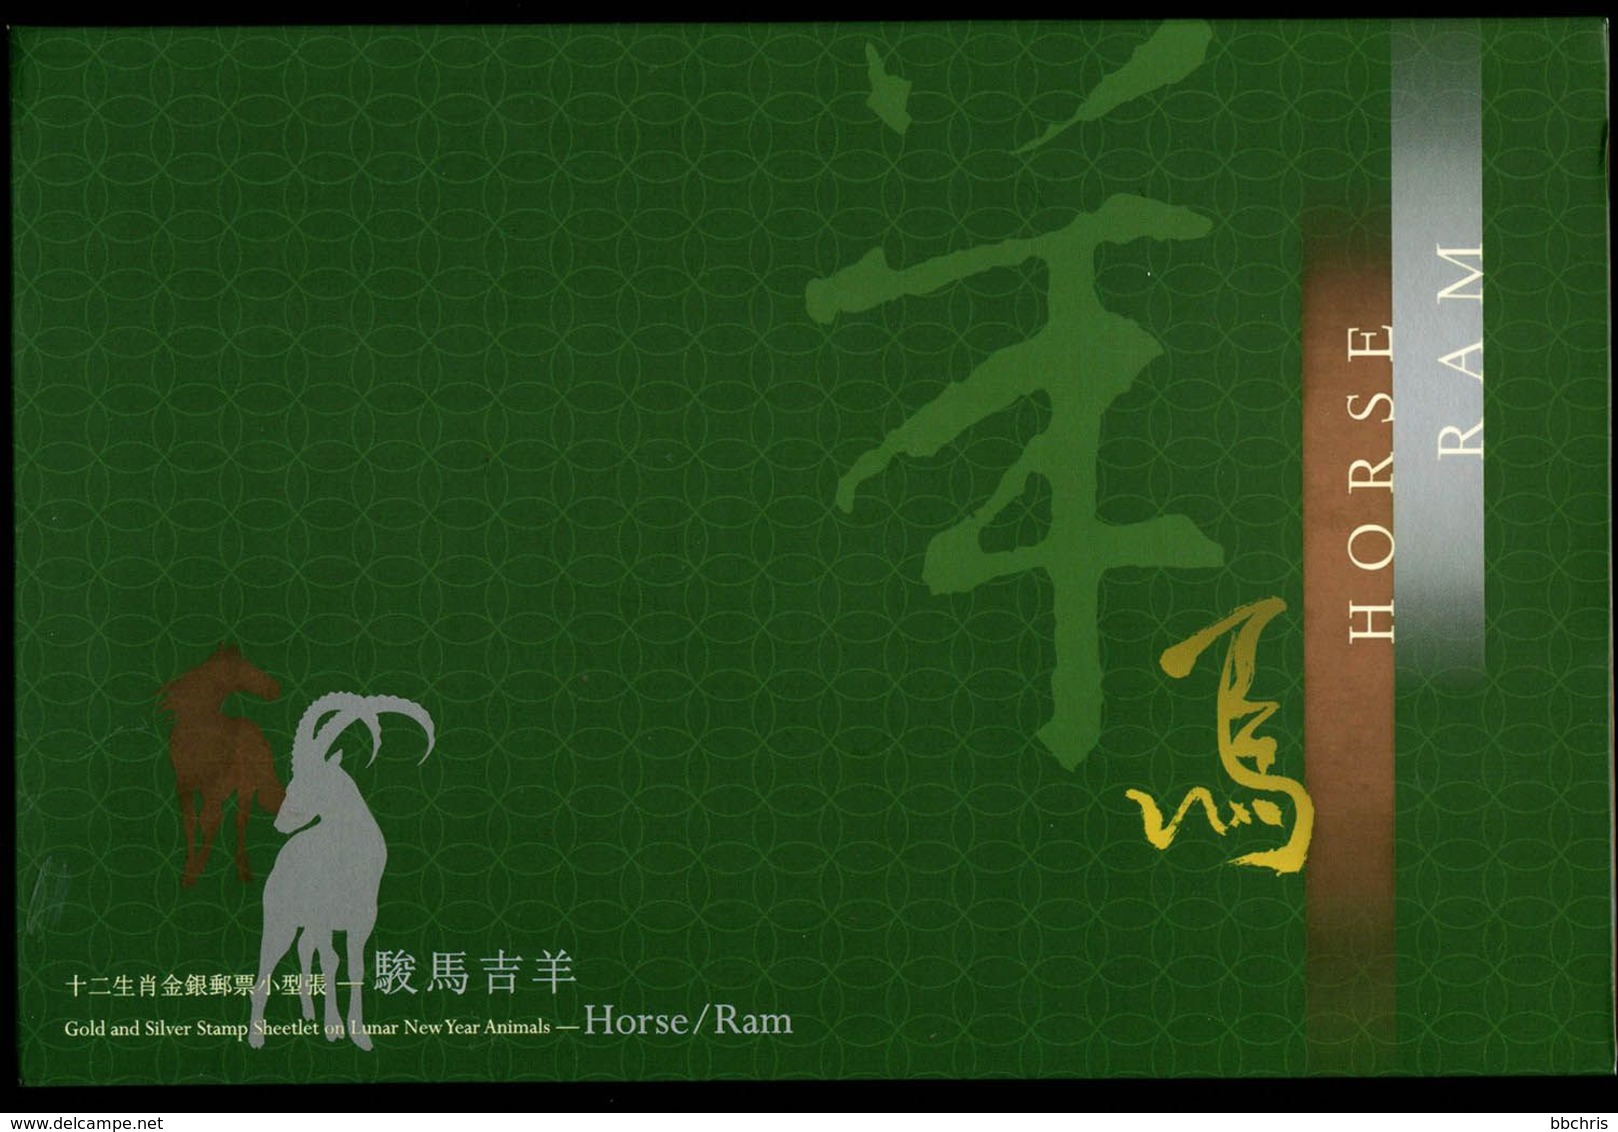 Hong Kong China 2003 New Year Gold Silver Horse Ram Stamps S/S Presentation Pack - Carnets